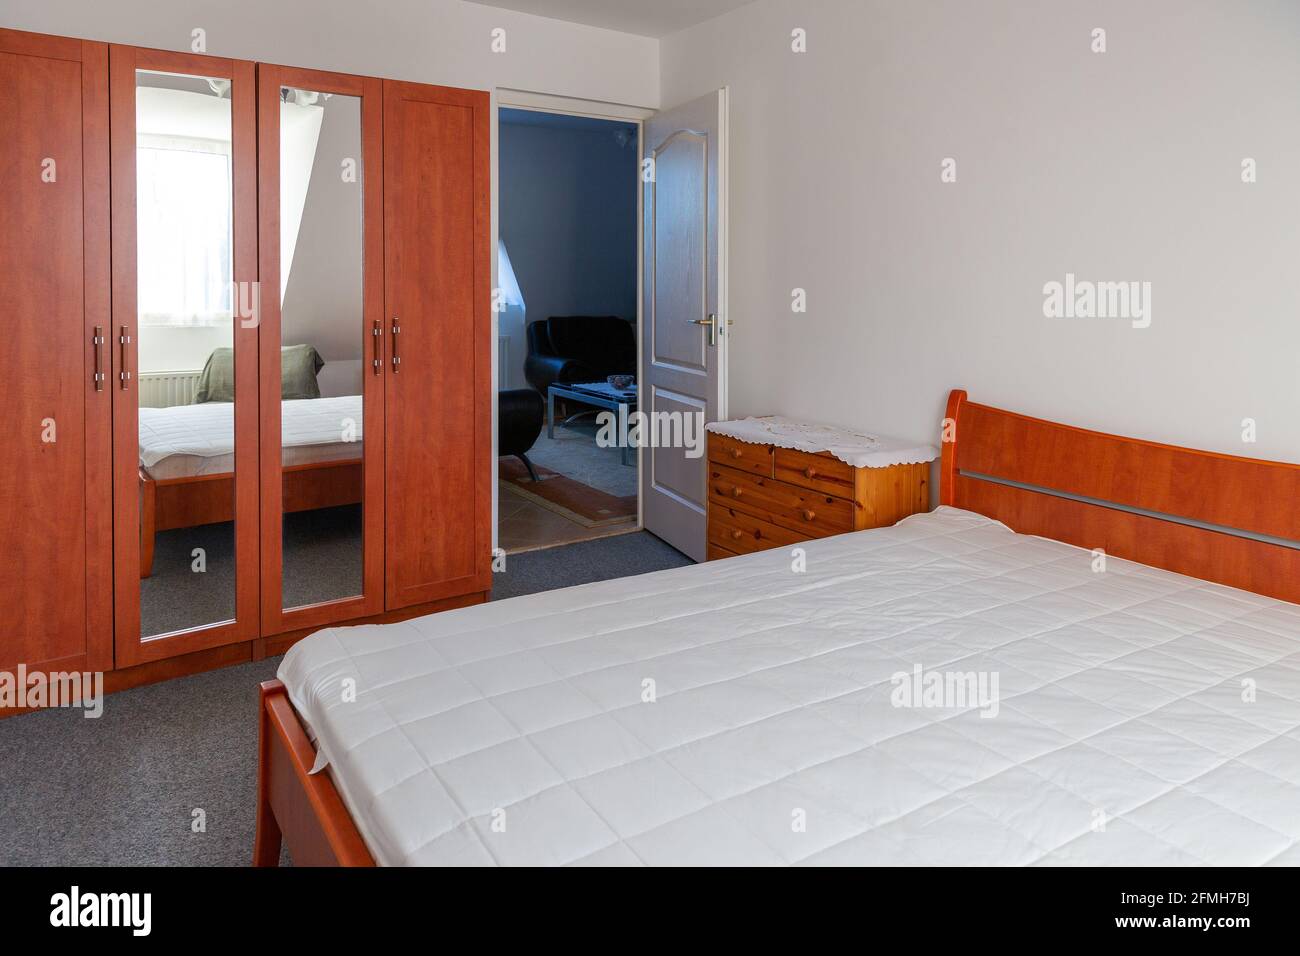 Cozy bedroom interior with wide double bed covered with white mattress protector. Stock Photo